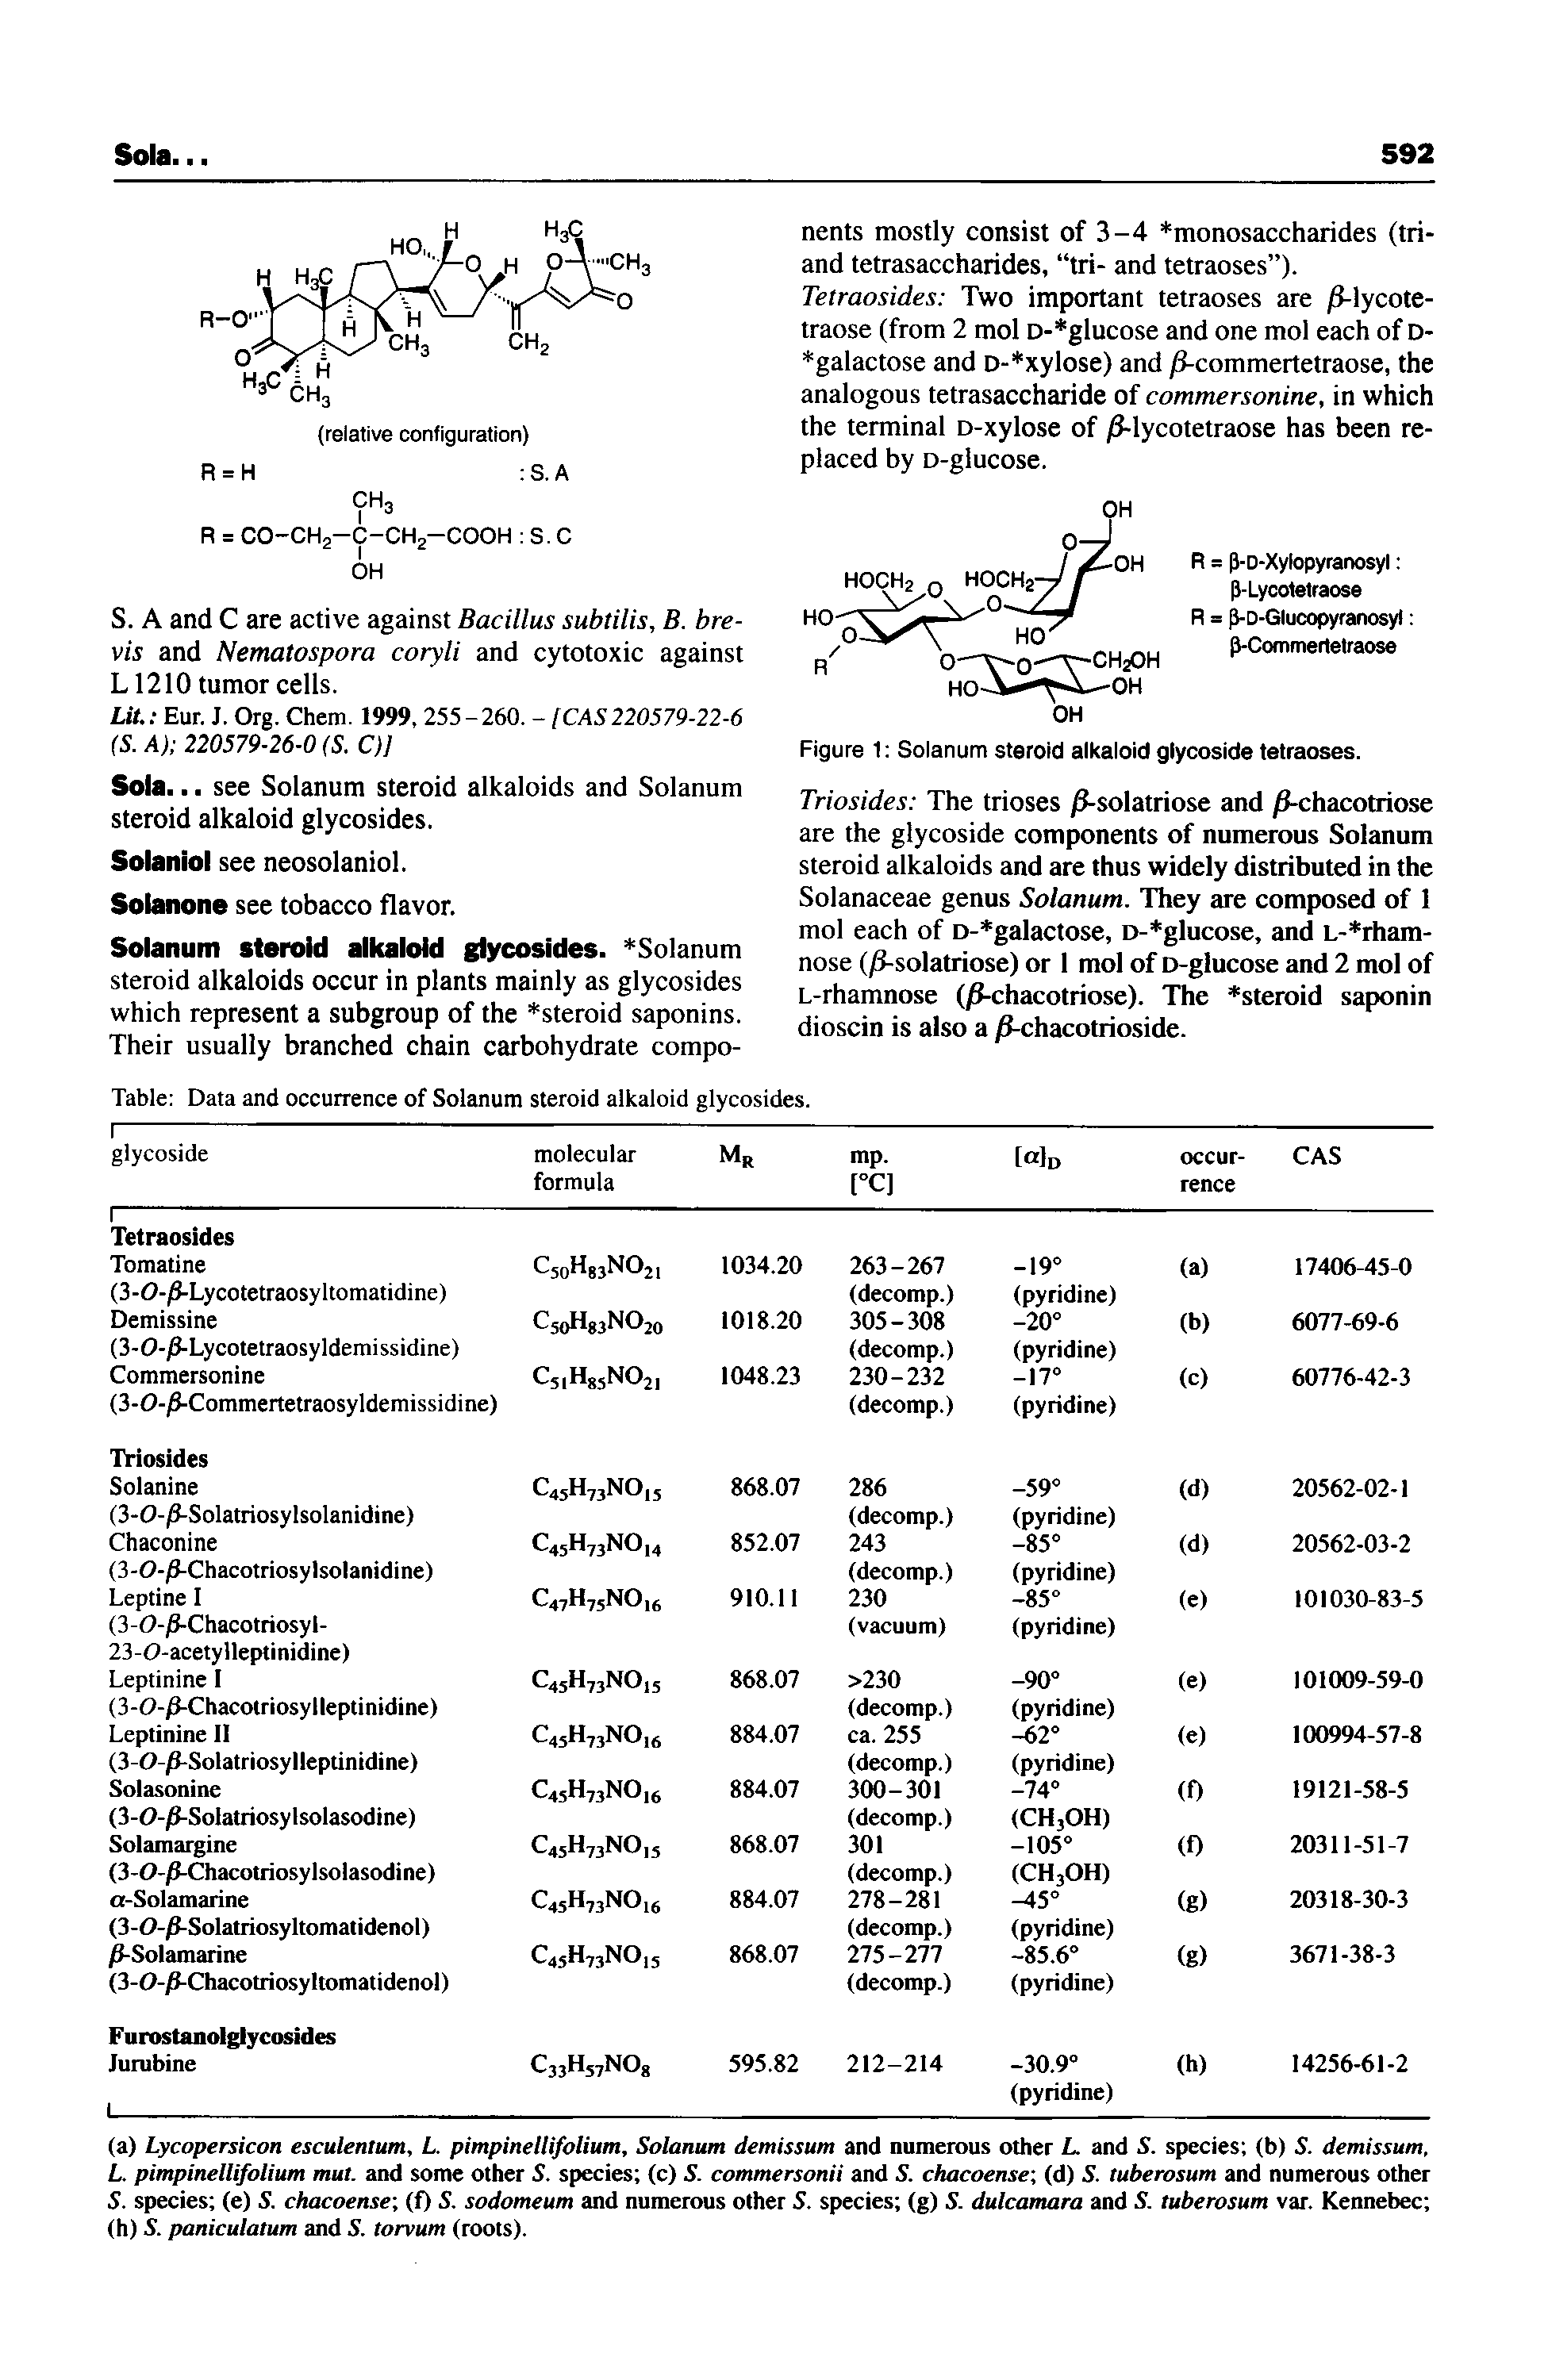 Table Data and occurrence of Solanum steroid alkaloid glycosides.